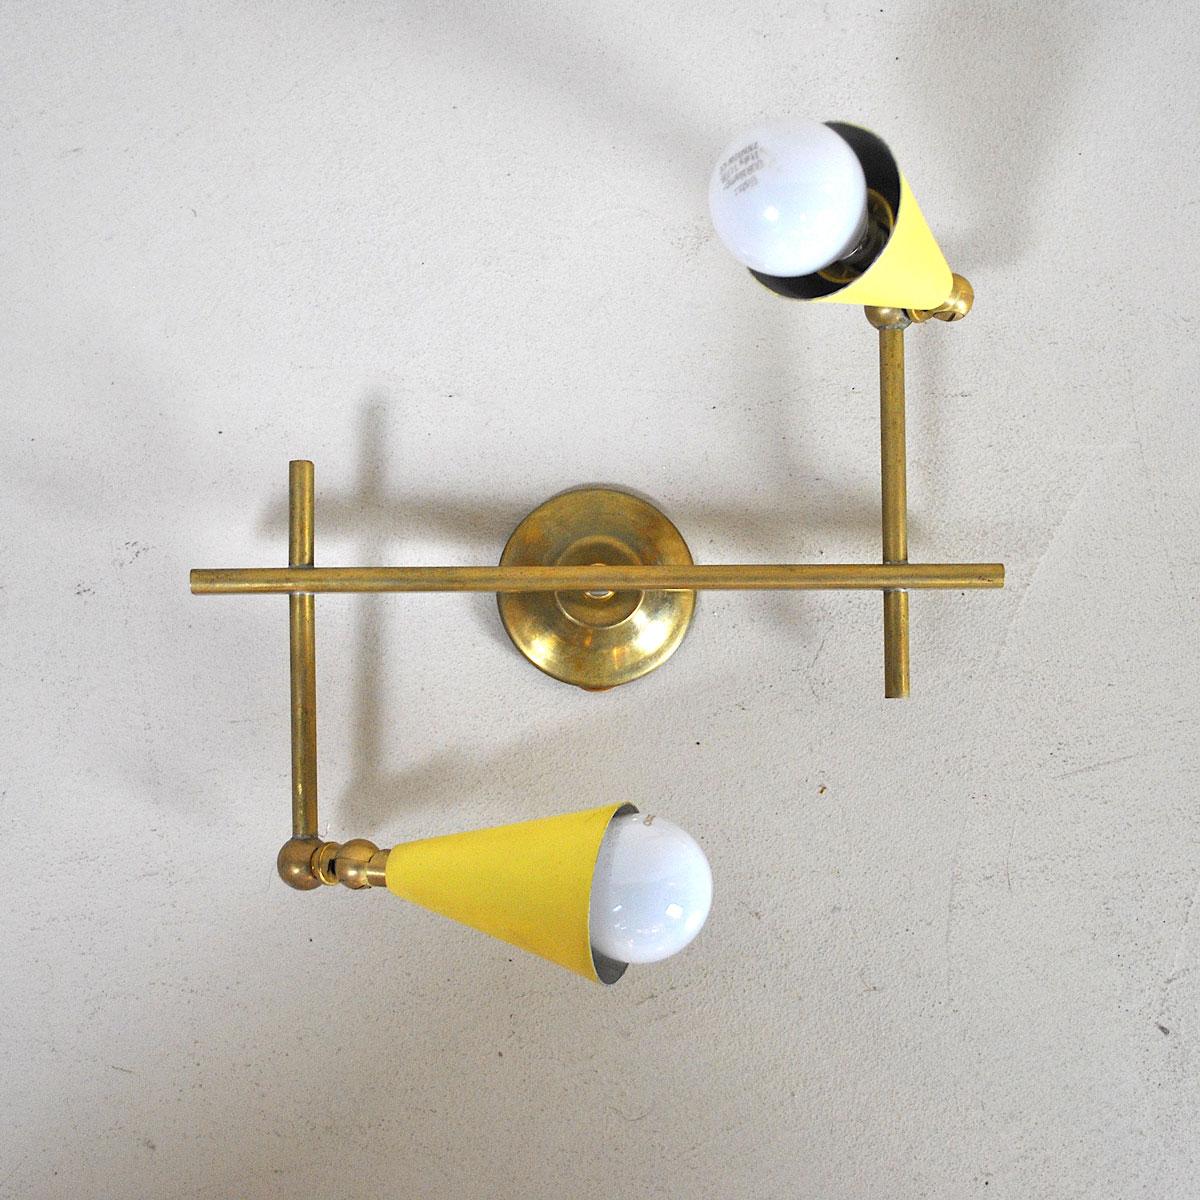 Italian sconce from the 1960s with a couple of cones on a brass structure.